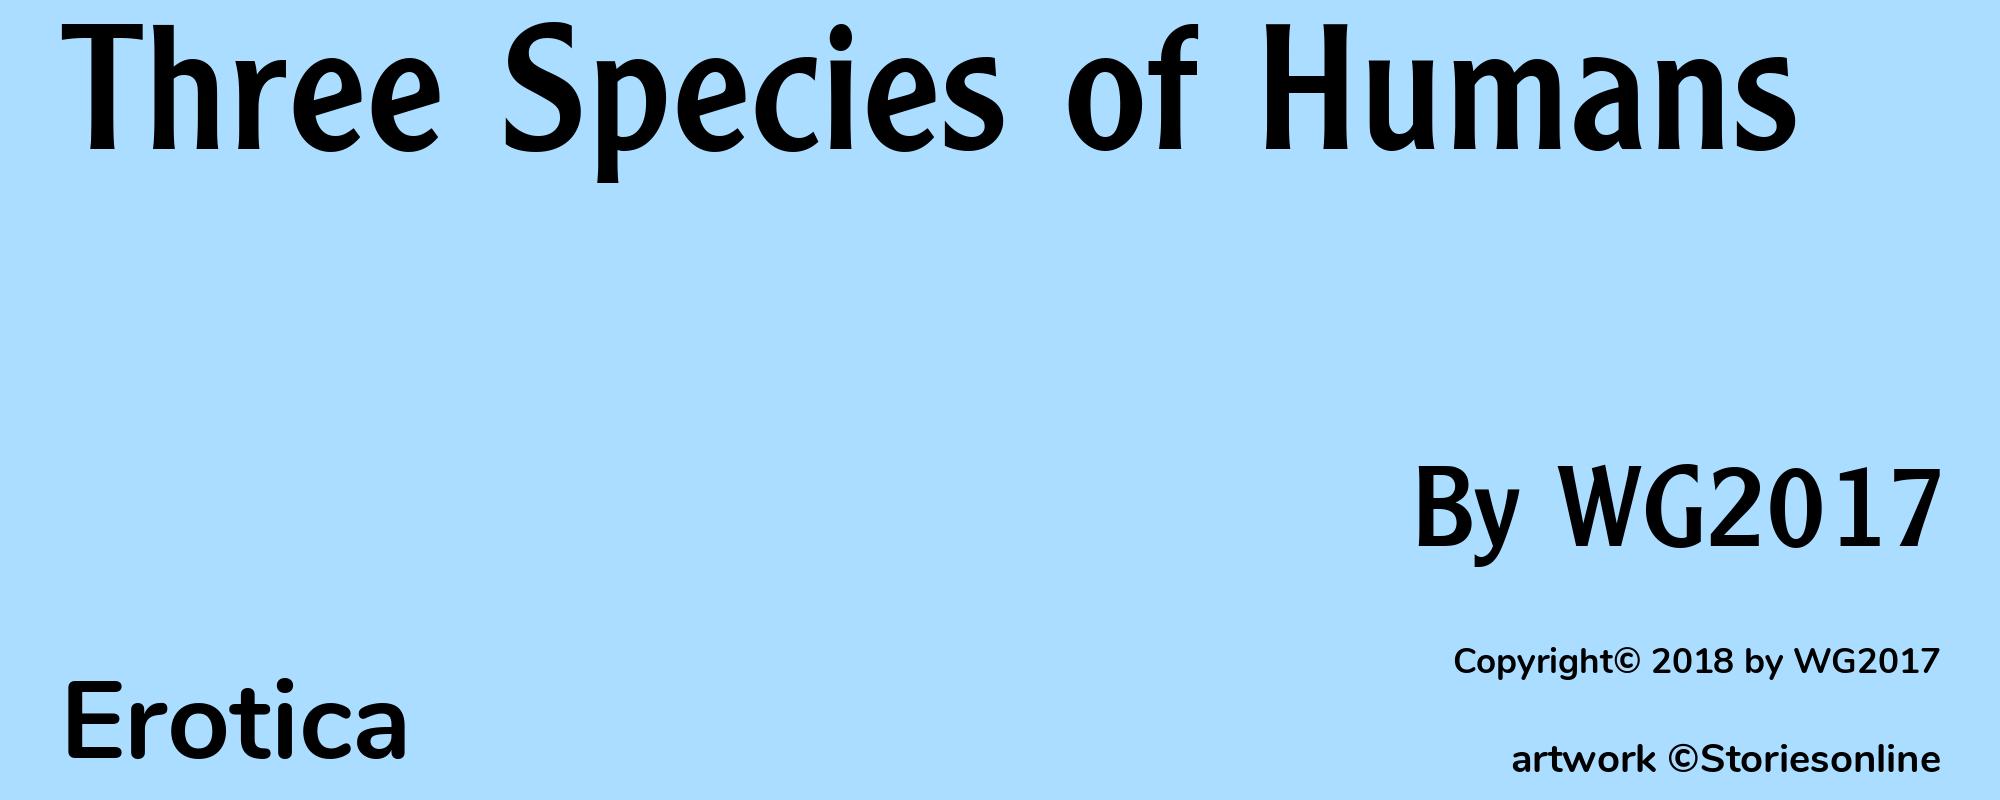 Three Species of Humans - Cover